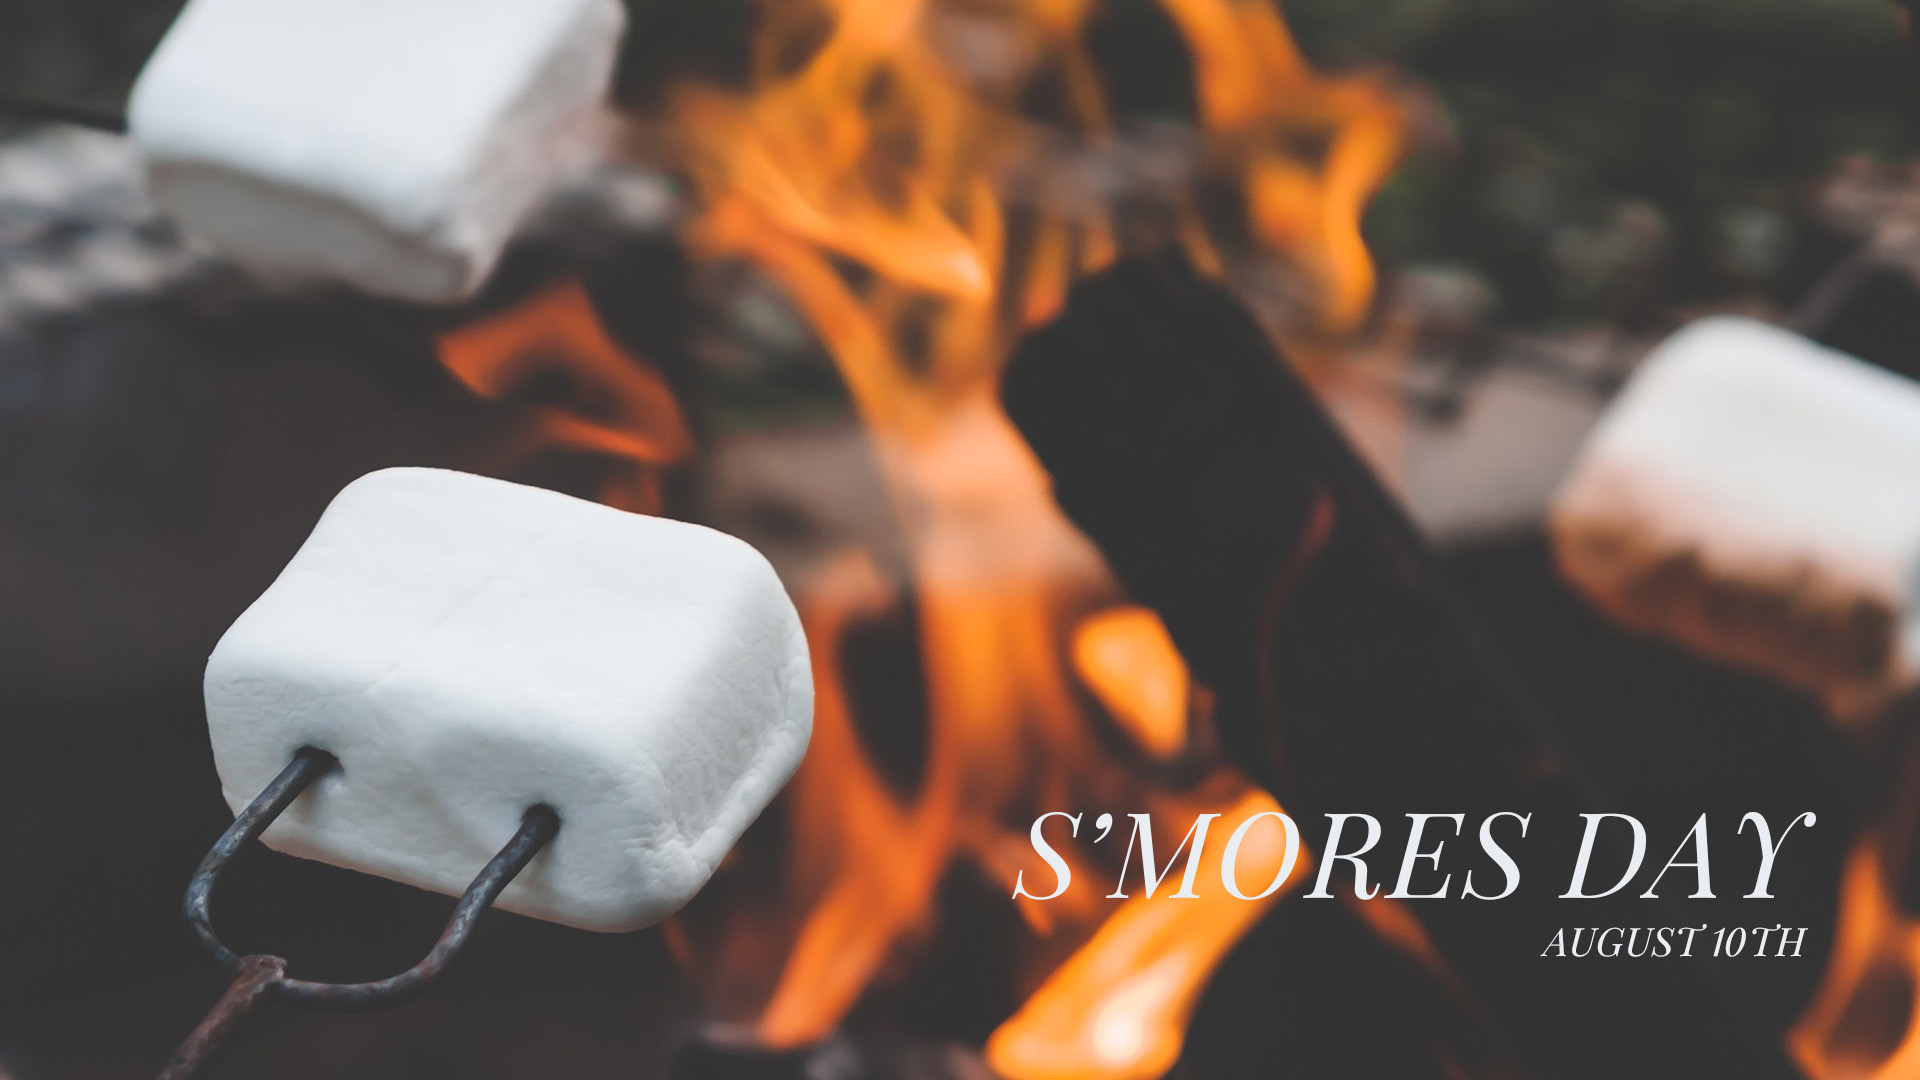 This is a close up image of marshmallows on fire sticks. The wood fire is in the background and is blurred. S'mores day August 10th is written in the bottom right side of the graphic in a serif font.